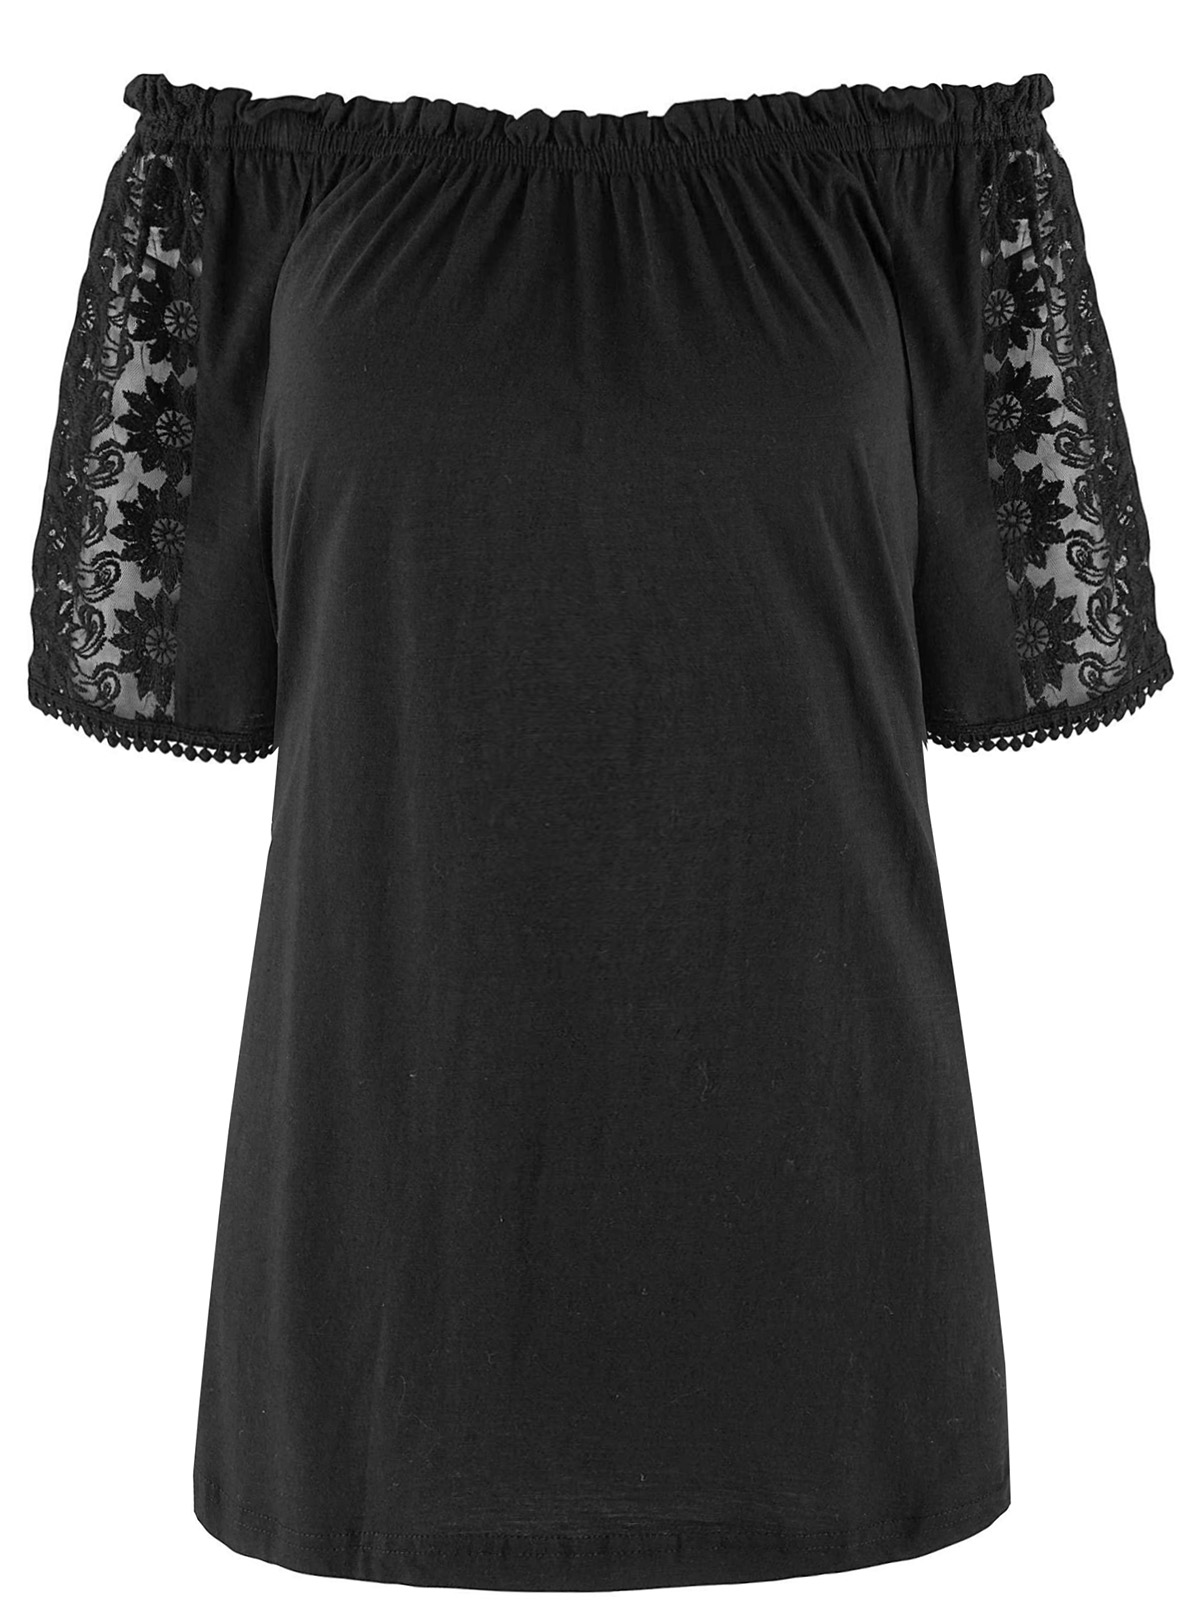 Julipa - - BLACK Gypsy Top with Lace Sleeve Insert - Plus Size 16 to 24